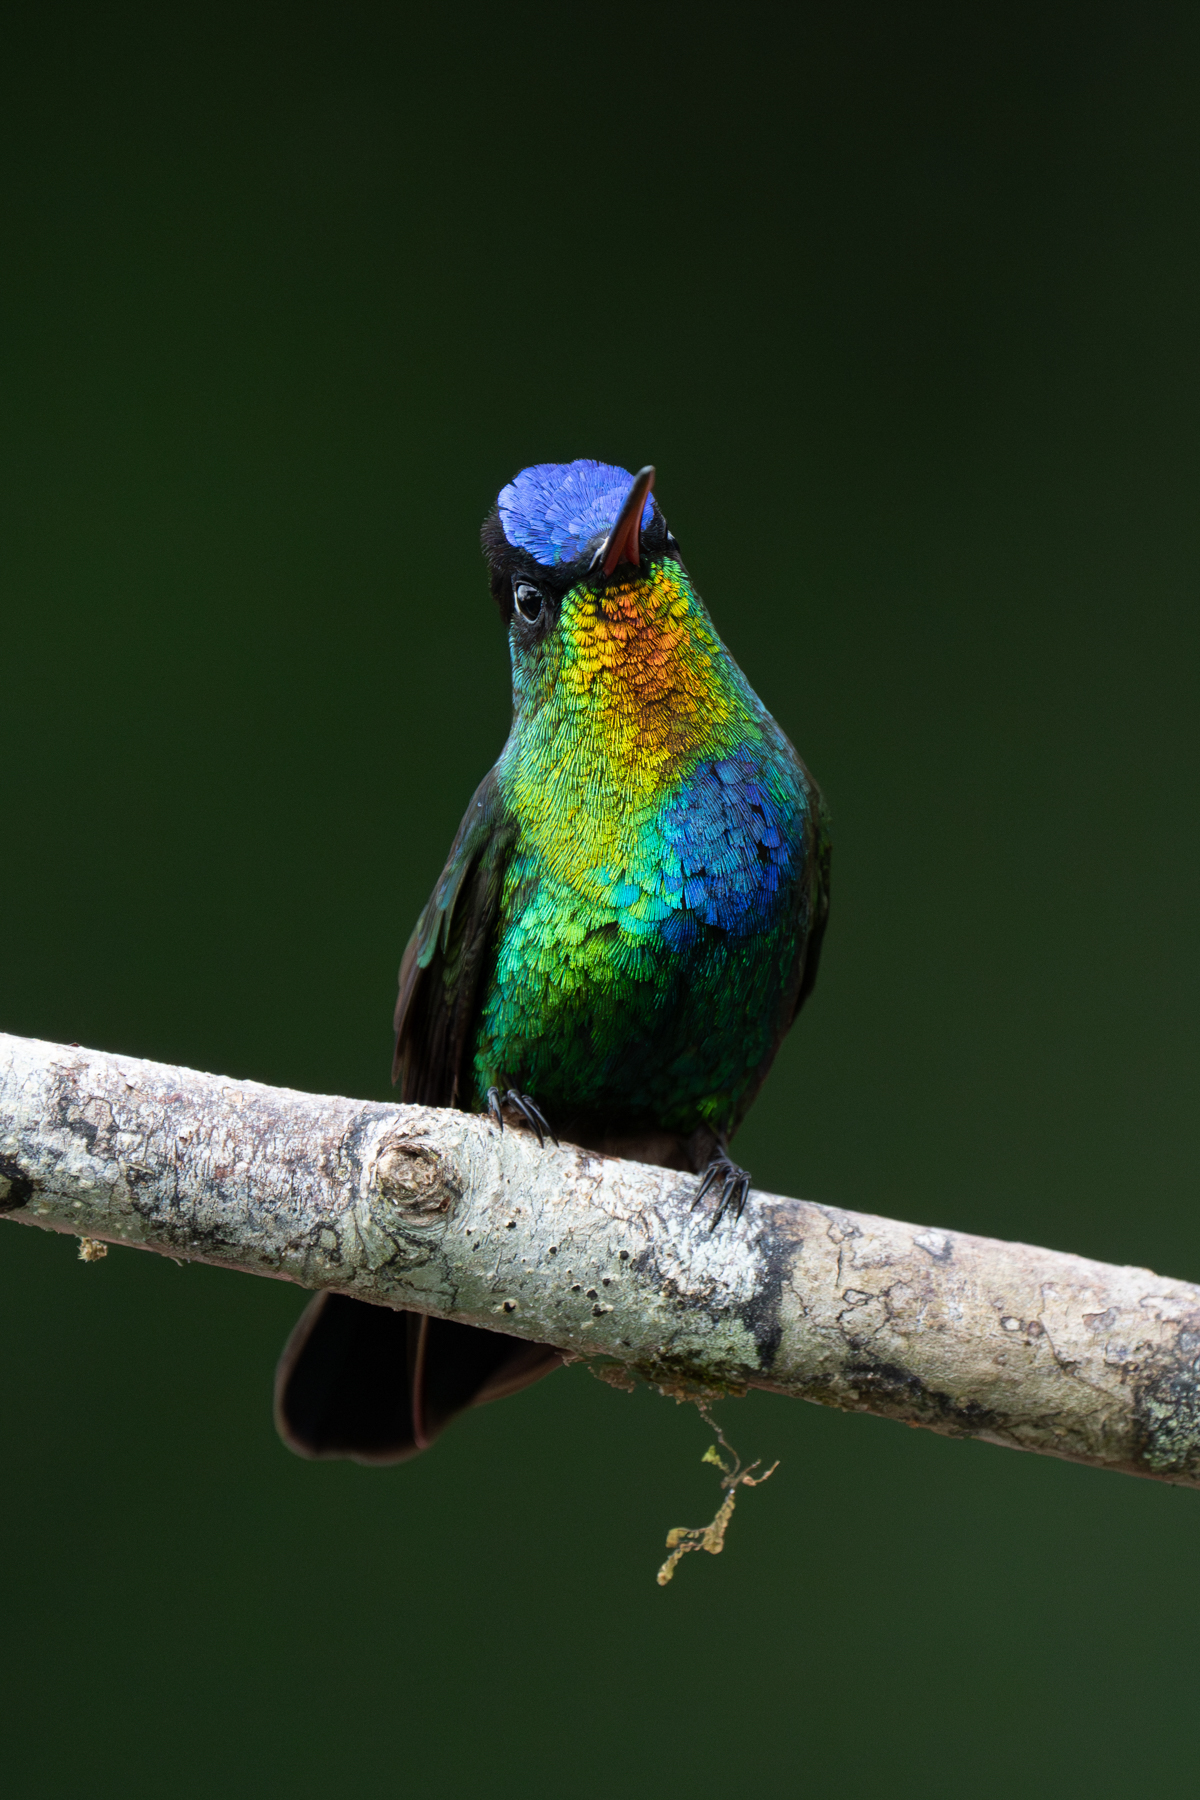 Fiery-throated Hummingbird. When their throats catch their sun it is like a rainbow (image by Inger Vandyke)